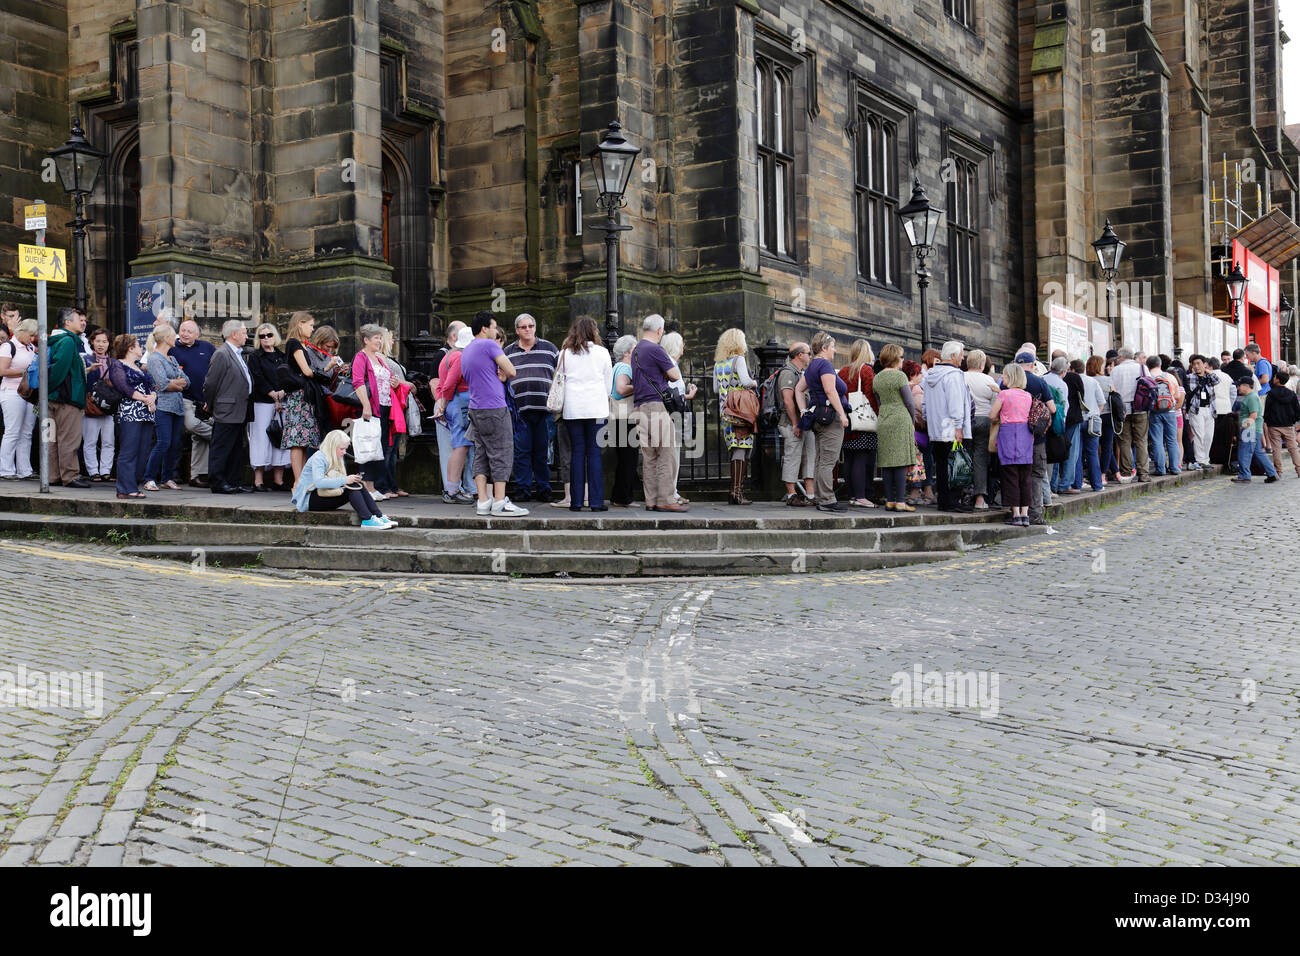 People queuing at the Assembly Hall venue on Mound Place during the Edinburgh Festival Fringe, Scotland, UK Stock Photo